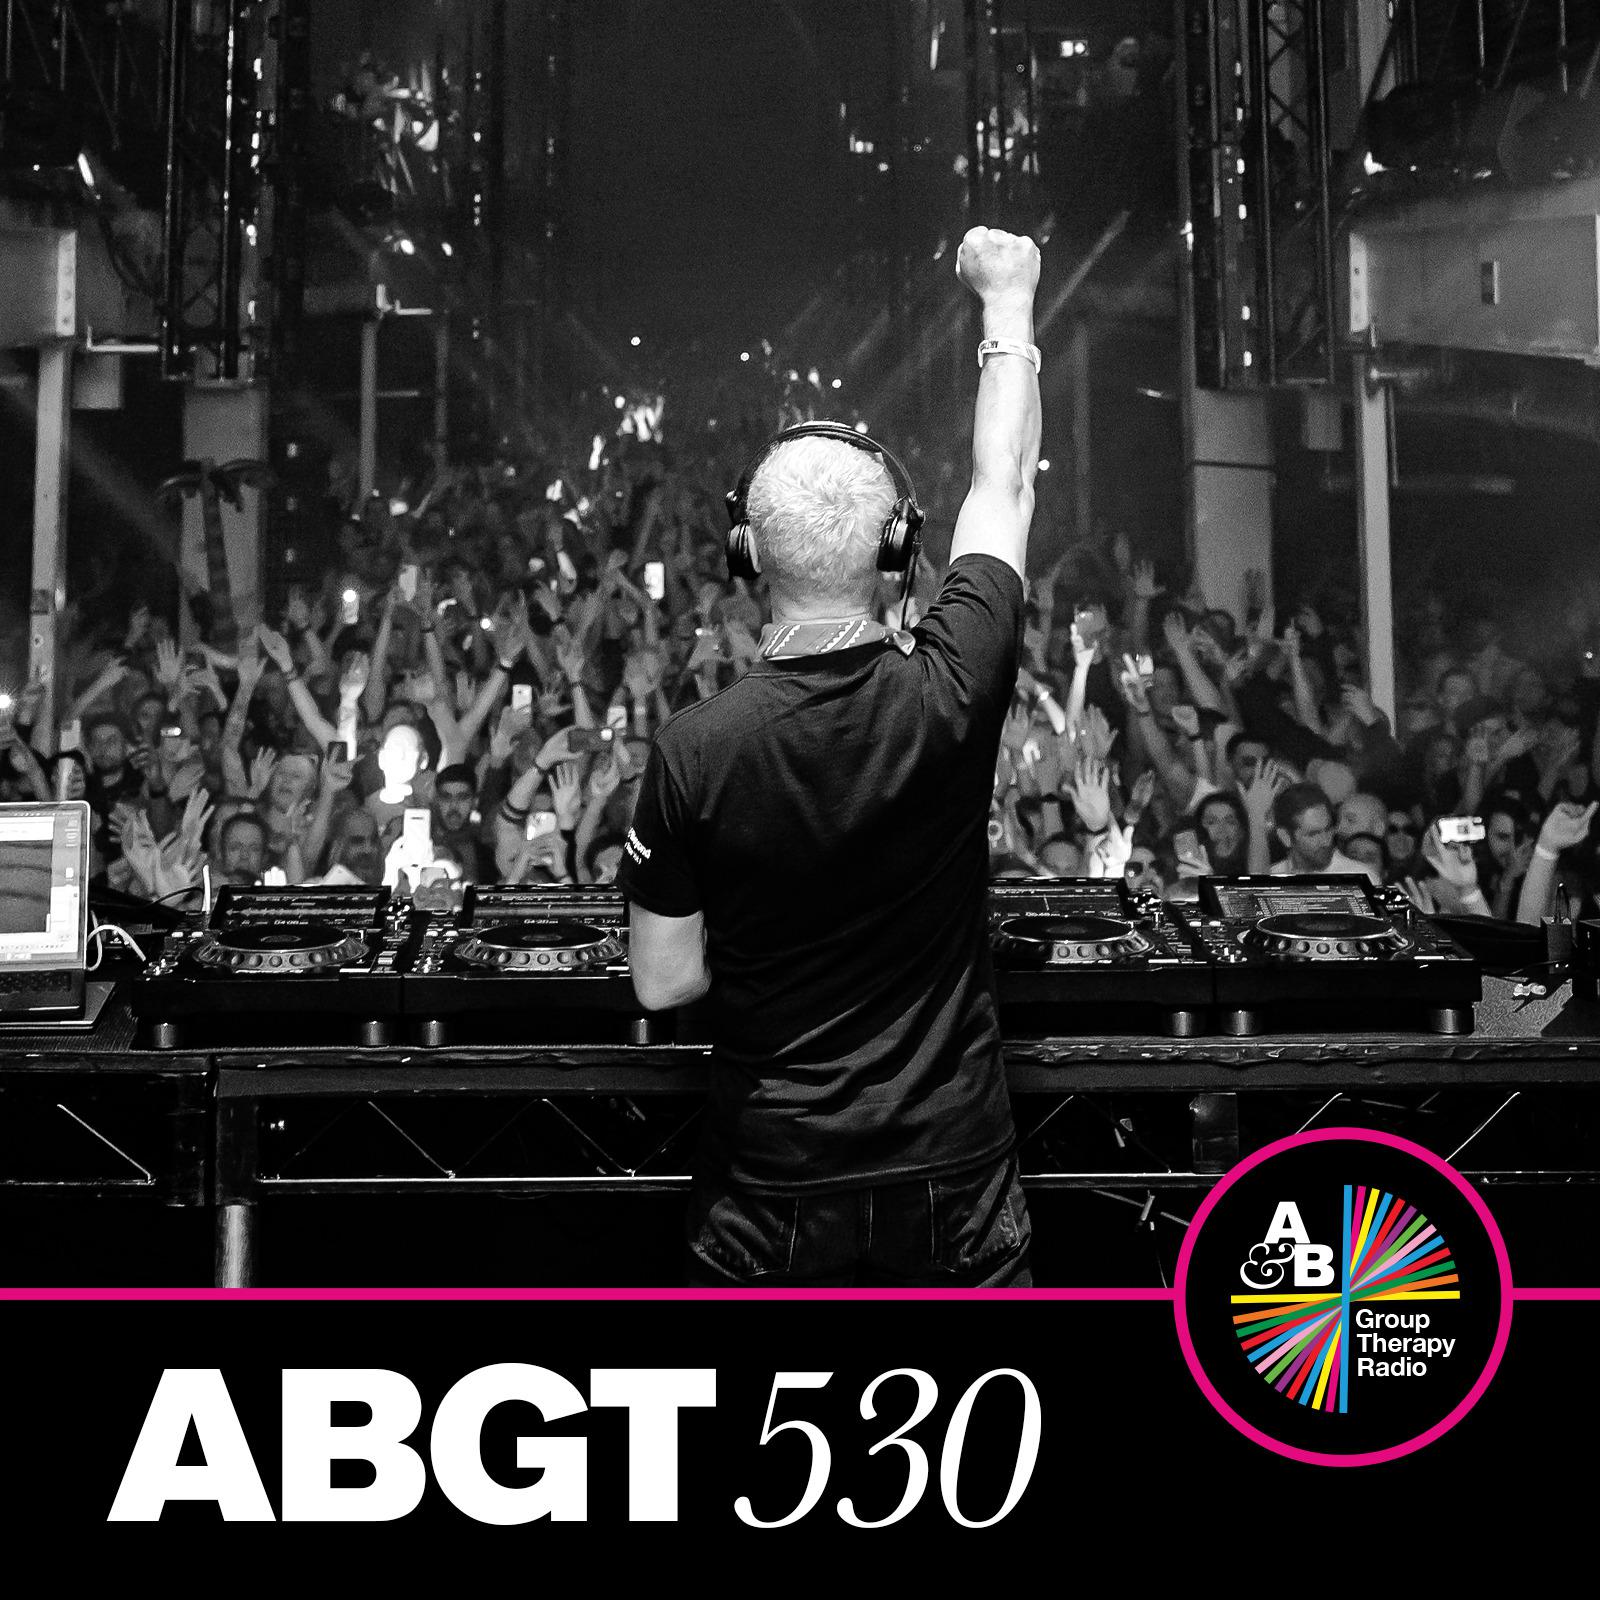 Nors Kode - I’m On Fire (ABGT530)